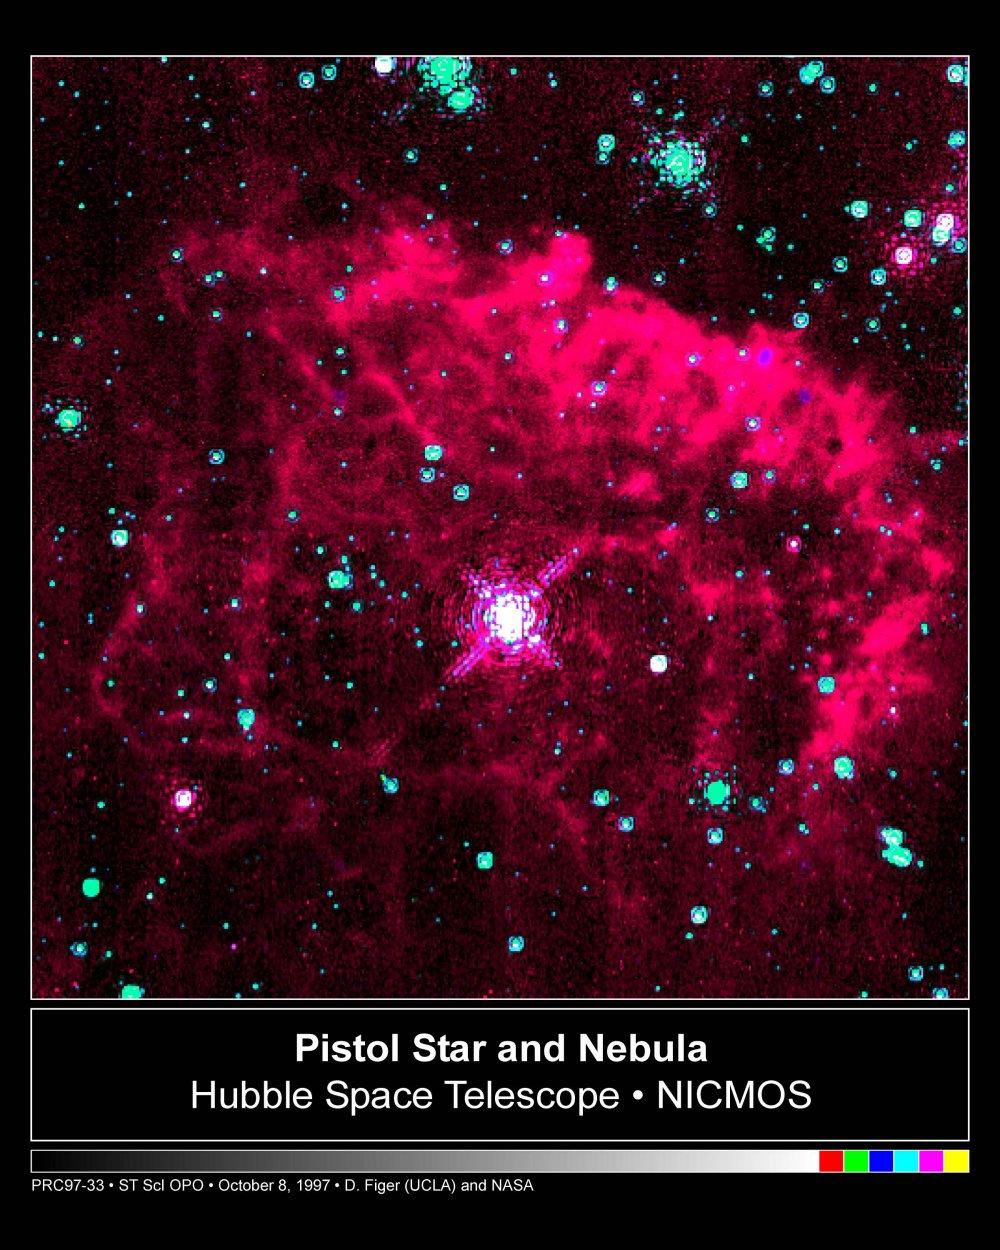 ! But are things different than what we learned in Astro 100? These are the First Stars after all. The Most Massive Star in the Milky Way Today!